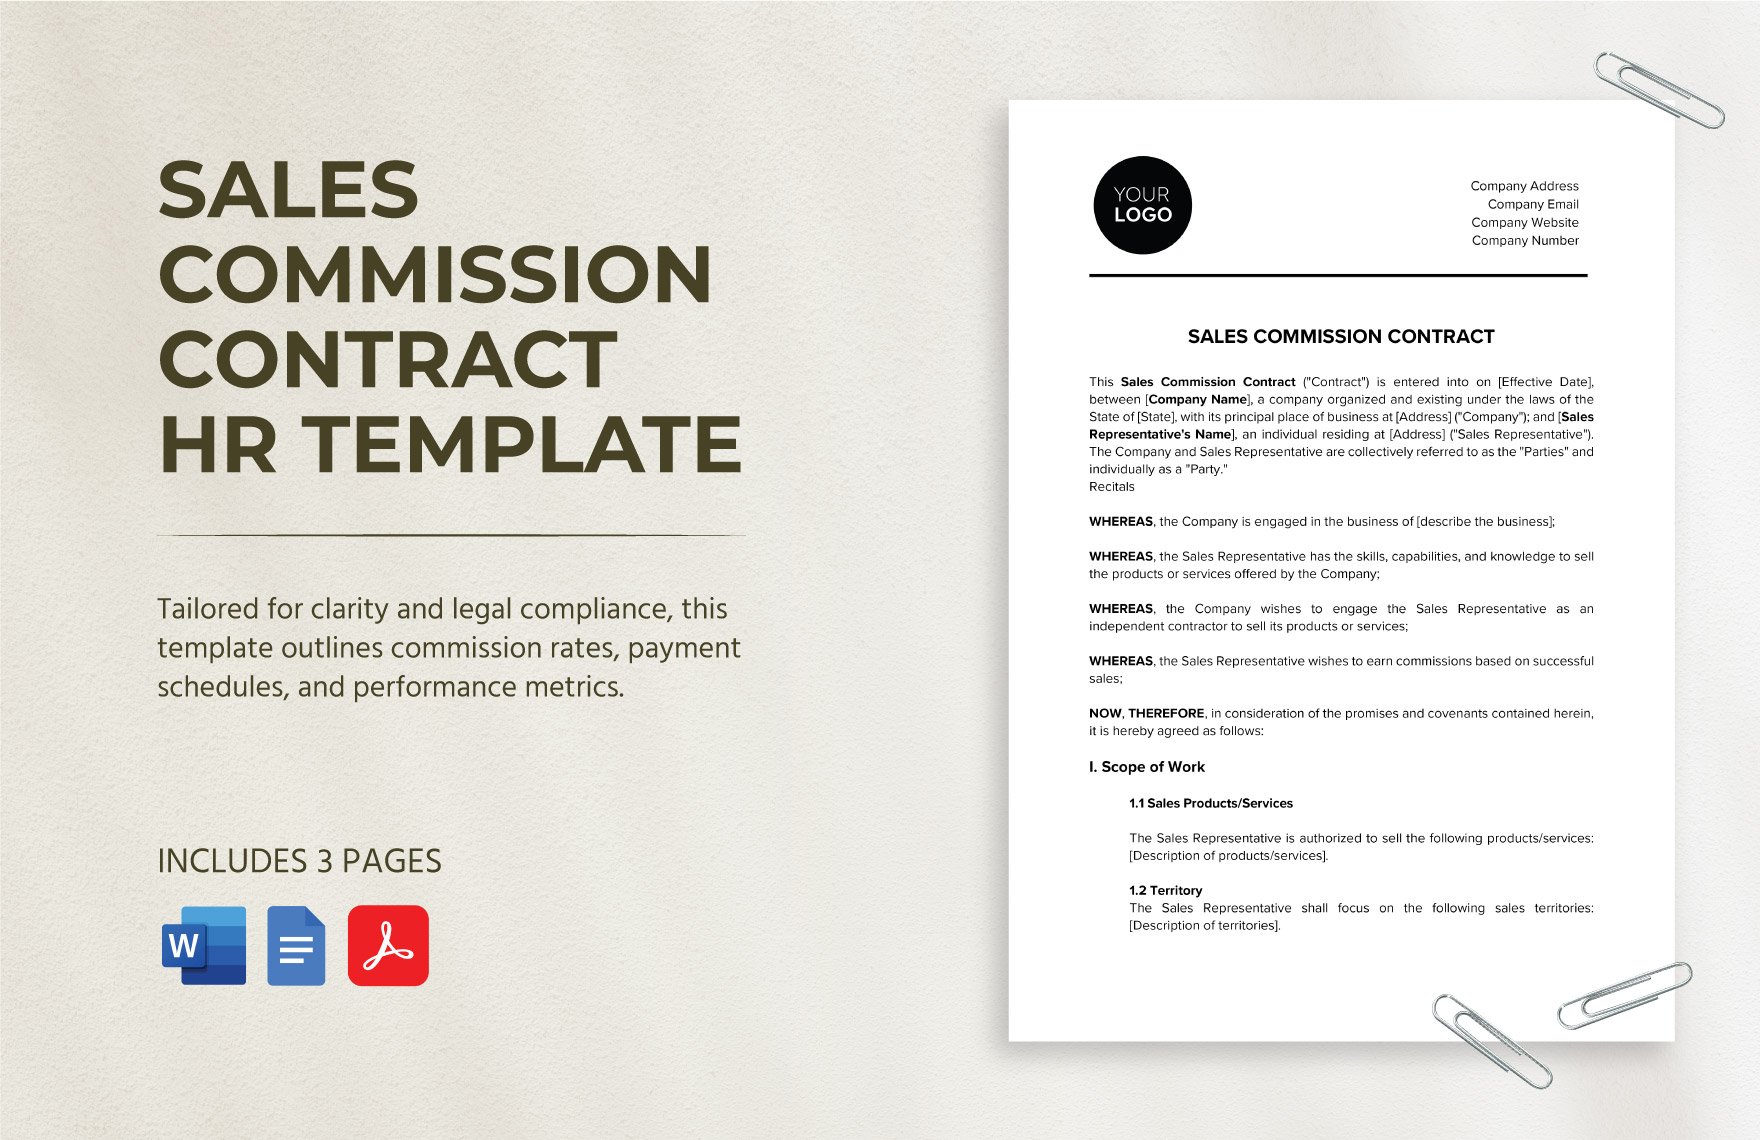 Sales Commission Contract HR Template in Word, Google Docs, PDF